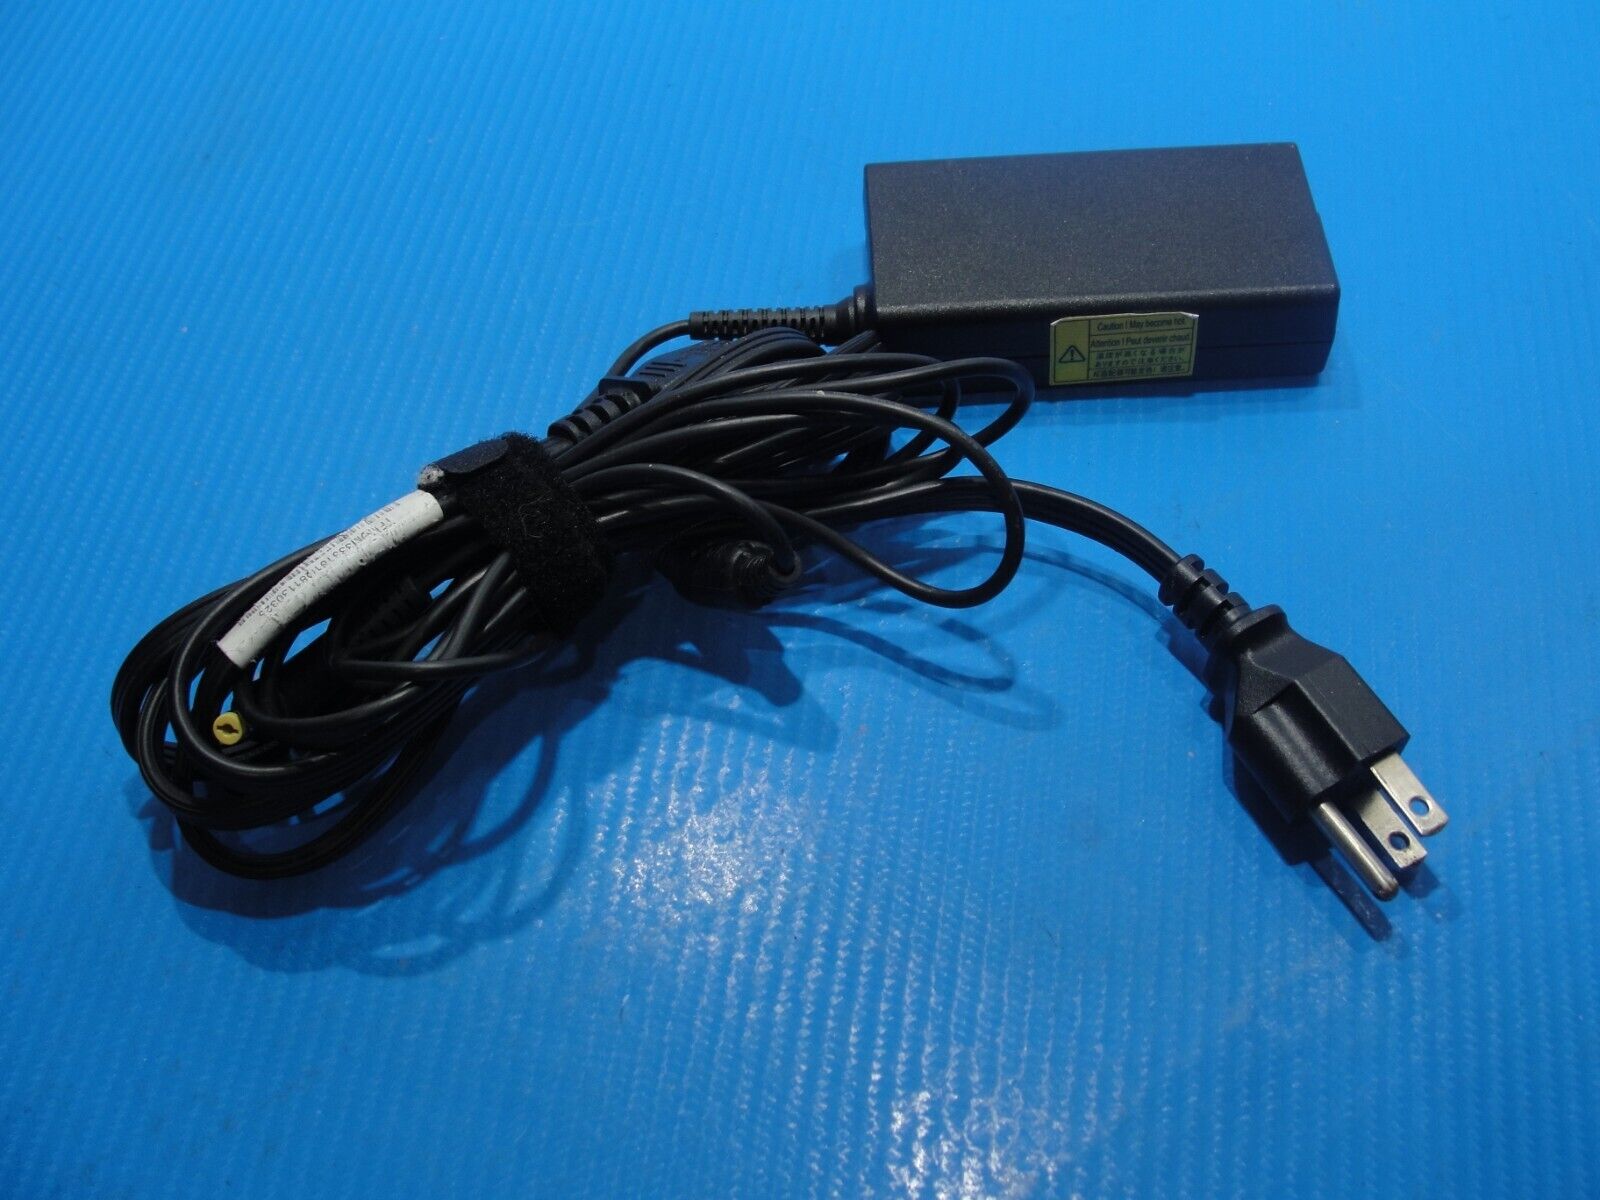 Genuine Delta Electronics Power Adapter Charger 19V 3.42A 65W ADP-65VHD